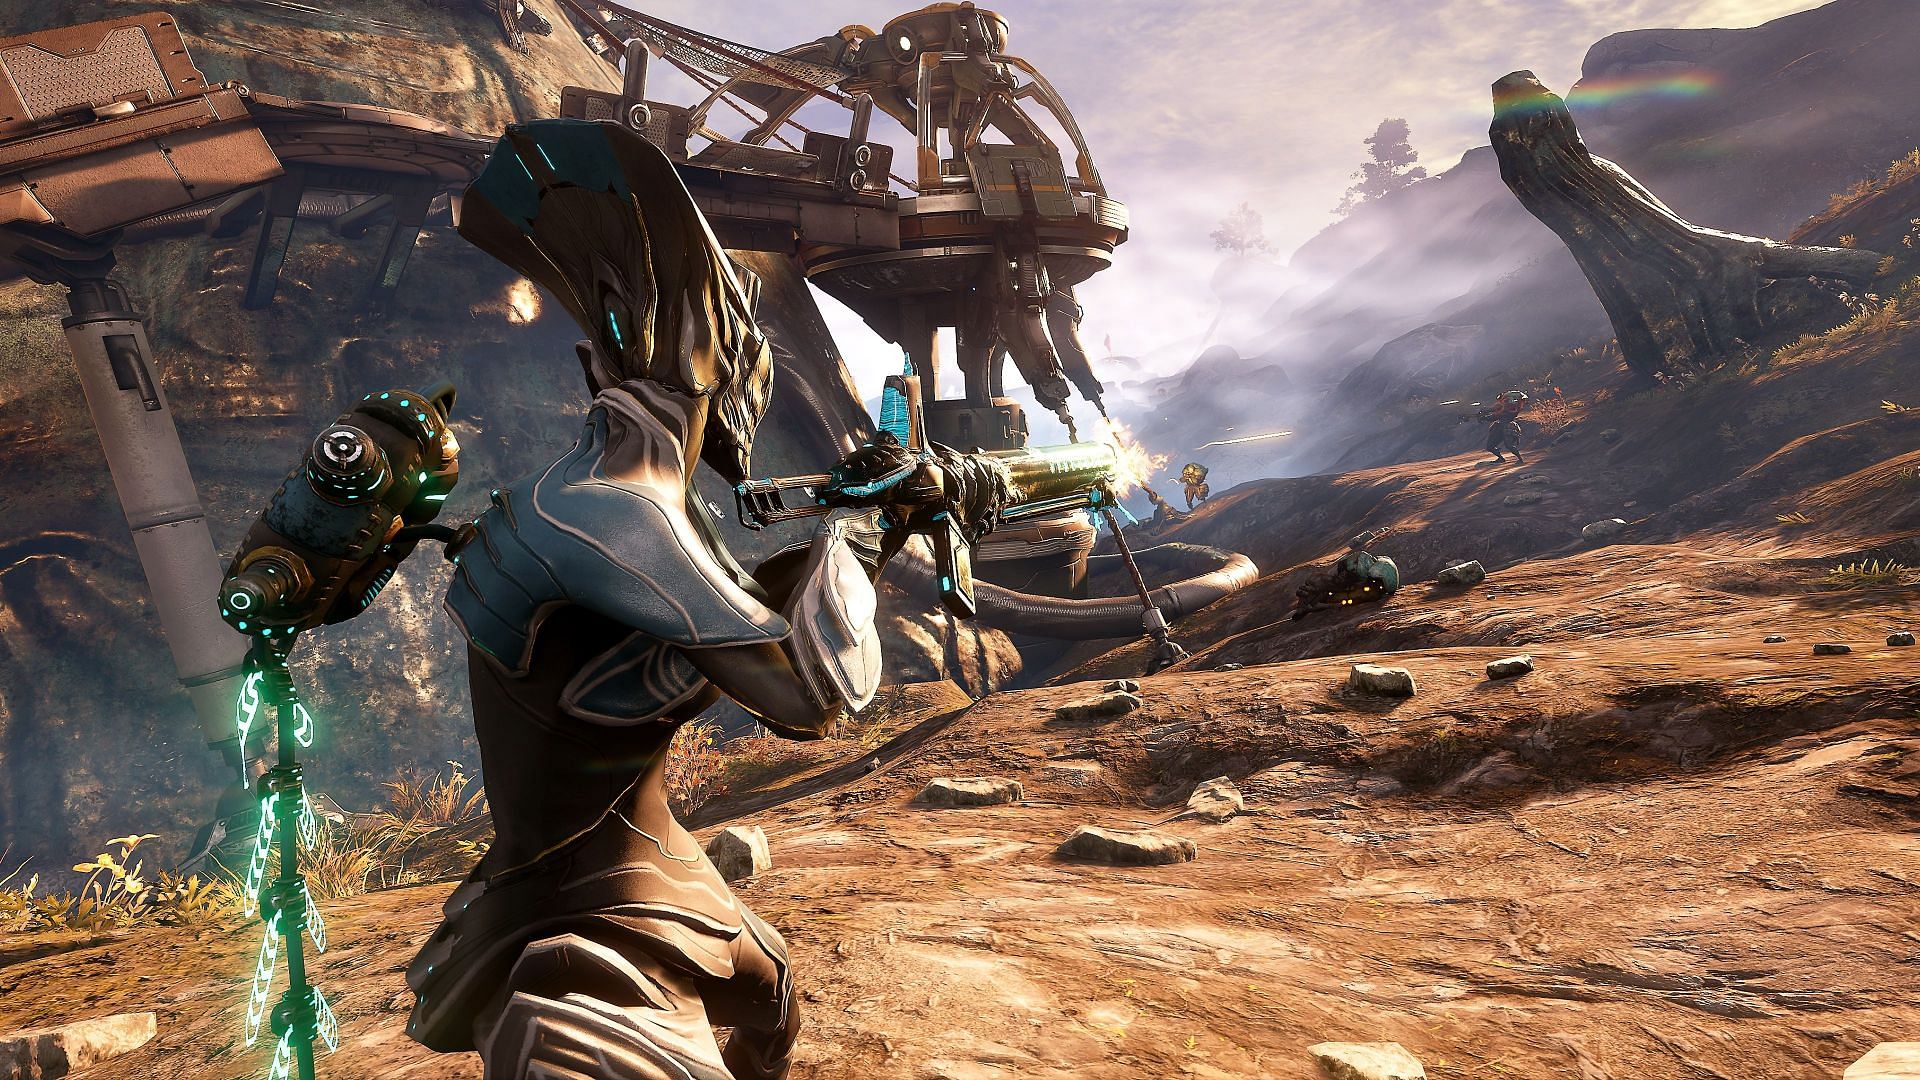 Warframe has seen a steady rise in popularity over the years (Image via Digital Extremes)